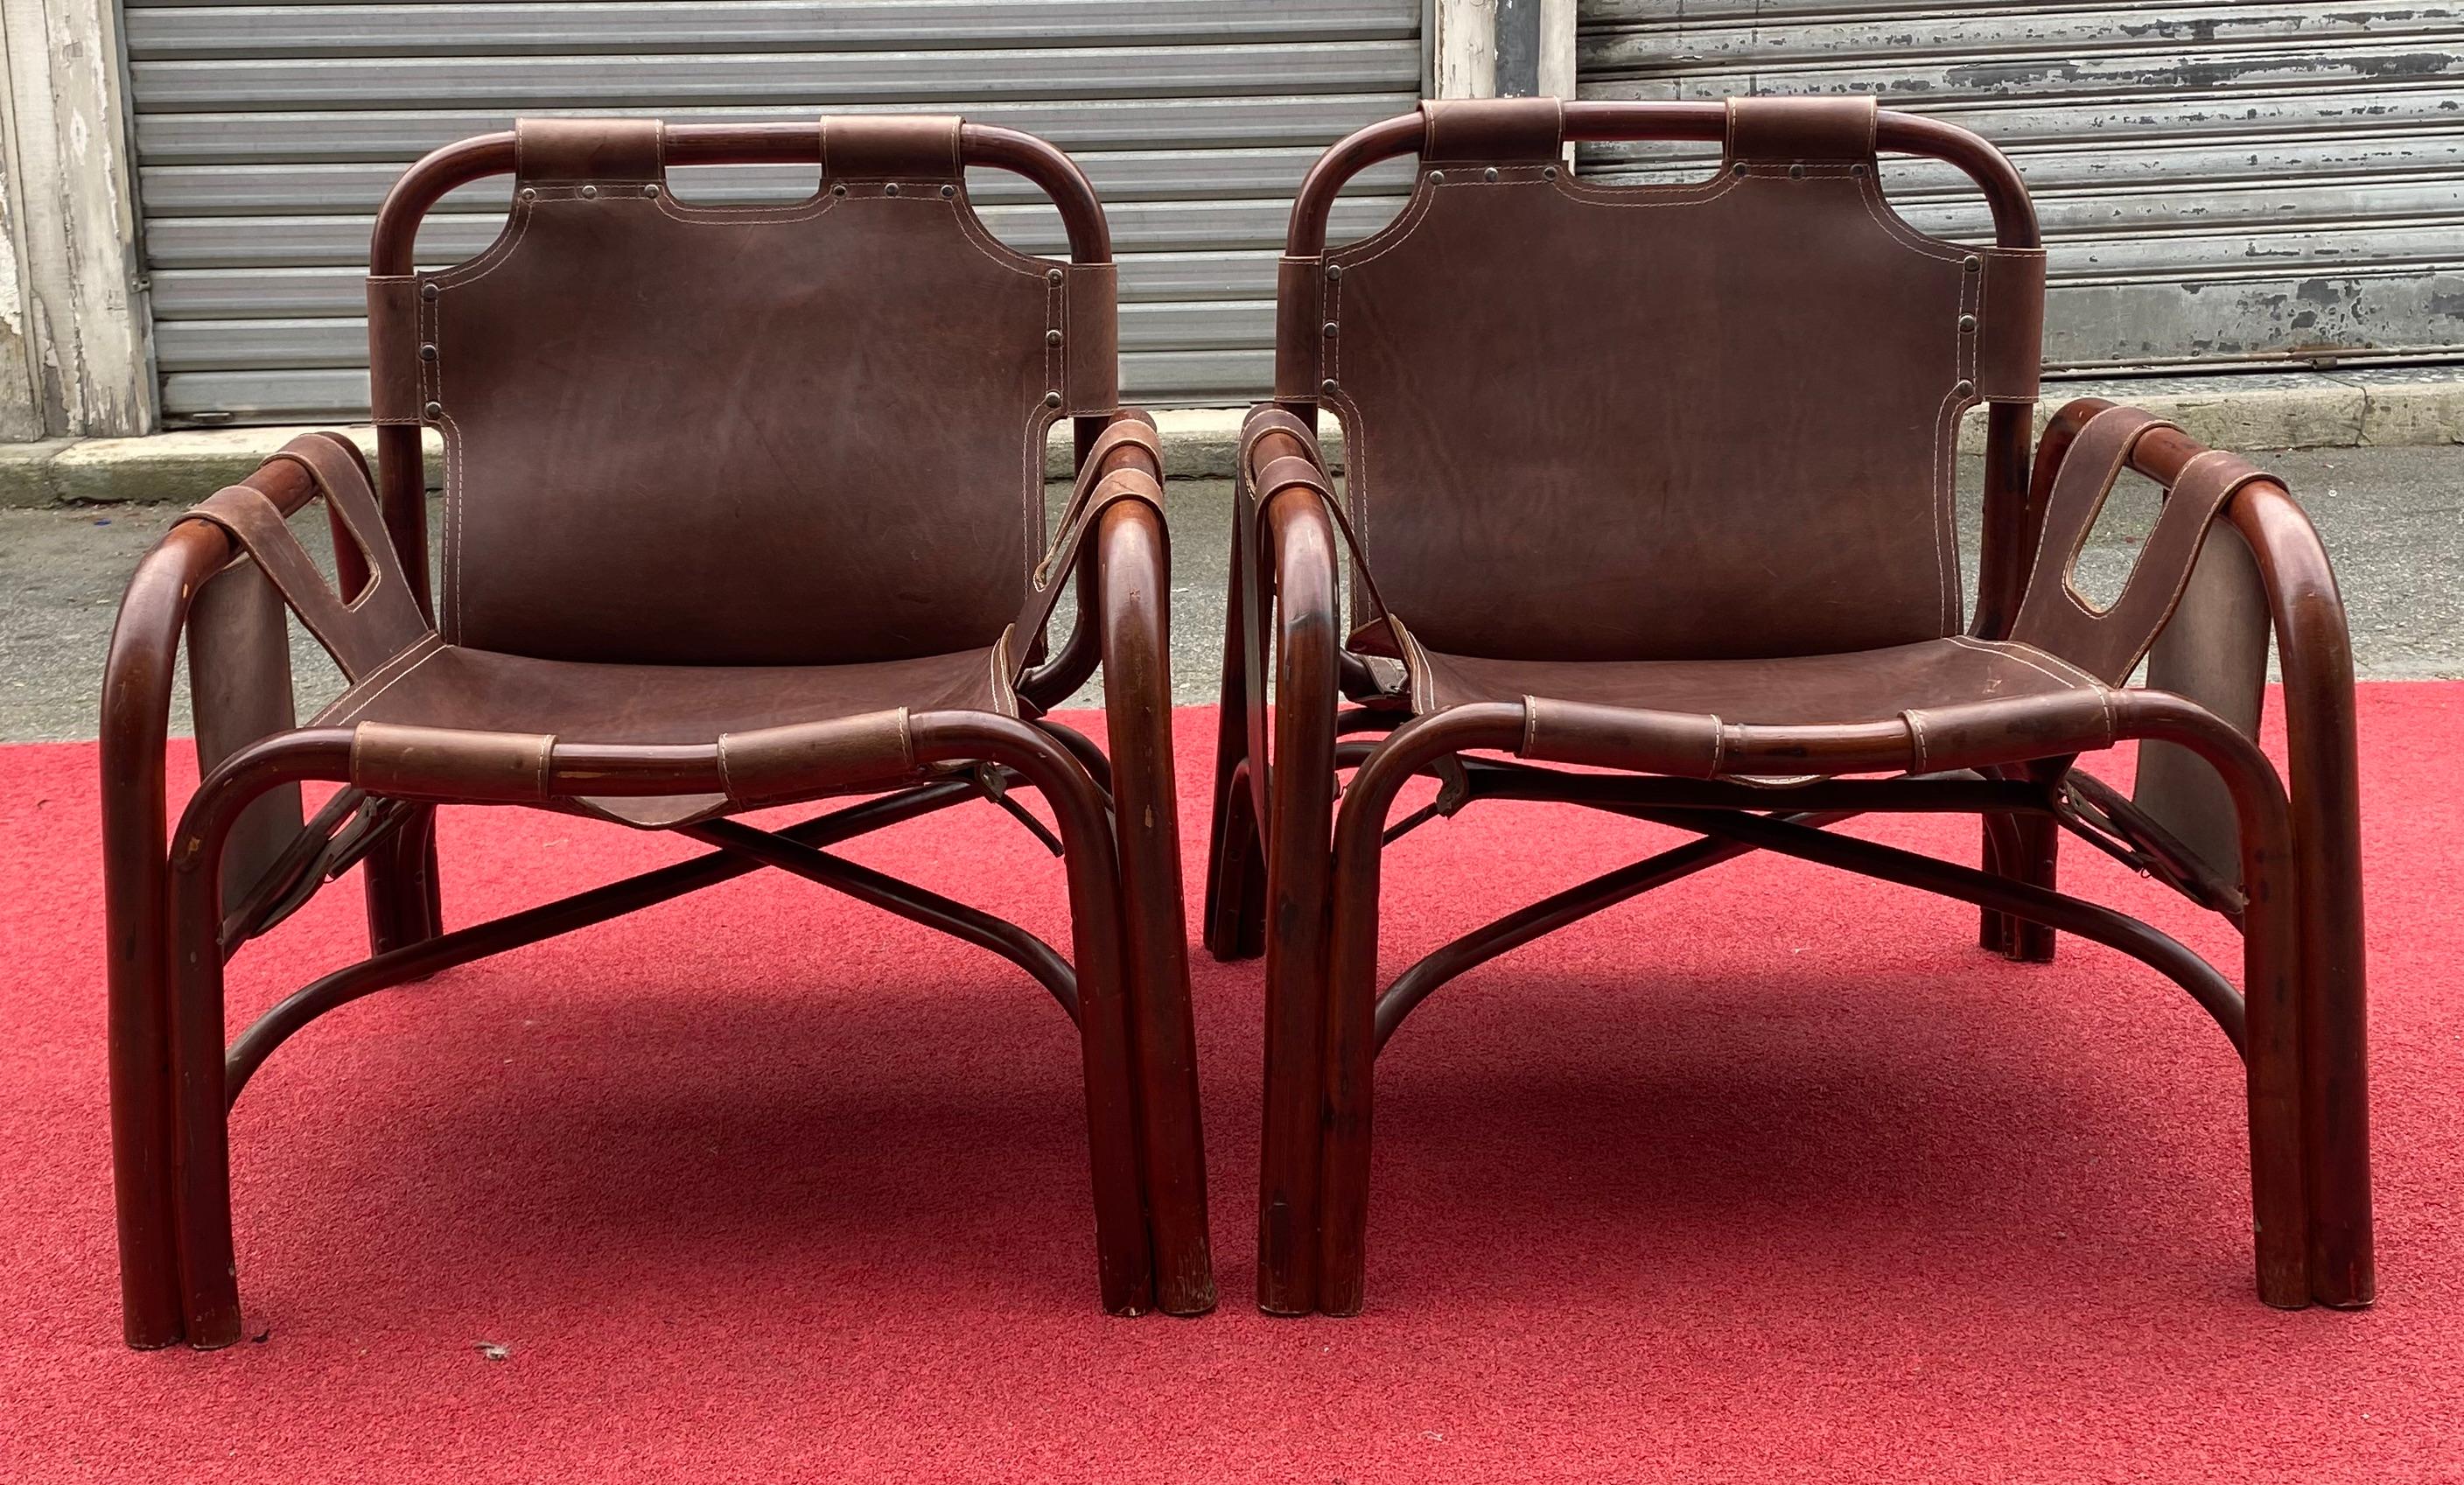 Pair of Tito Agnoli armchairs-Bonacina Edition 1960.
Bamboo frame / Seat and back in stitched and riveted leather.
Measures: L 68 x W 72 x H 70
Leather restored to new
Superb condition.